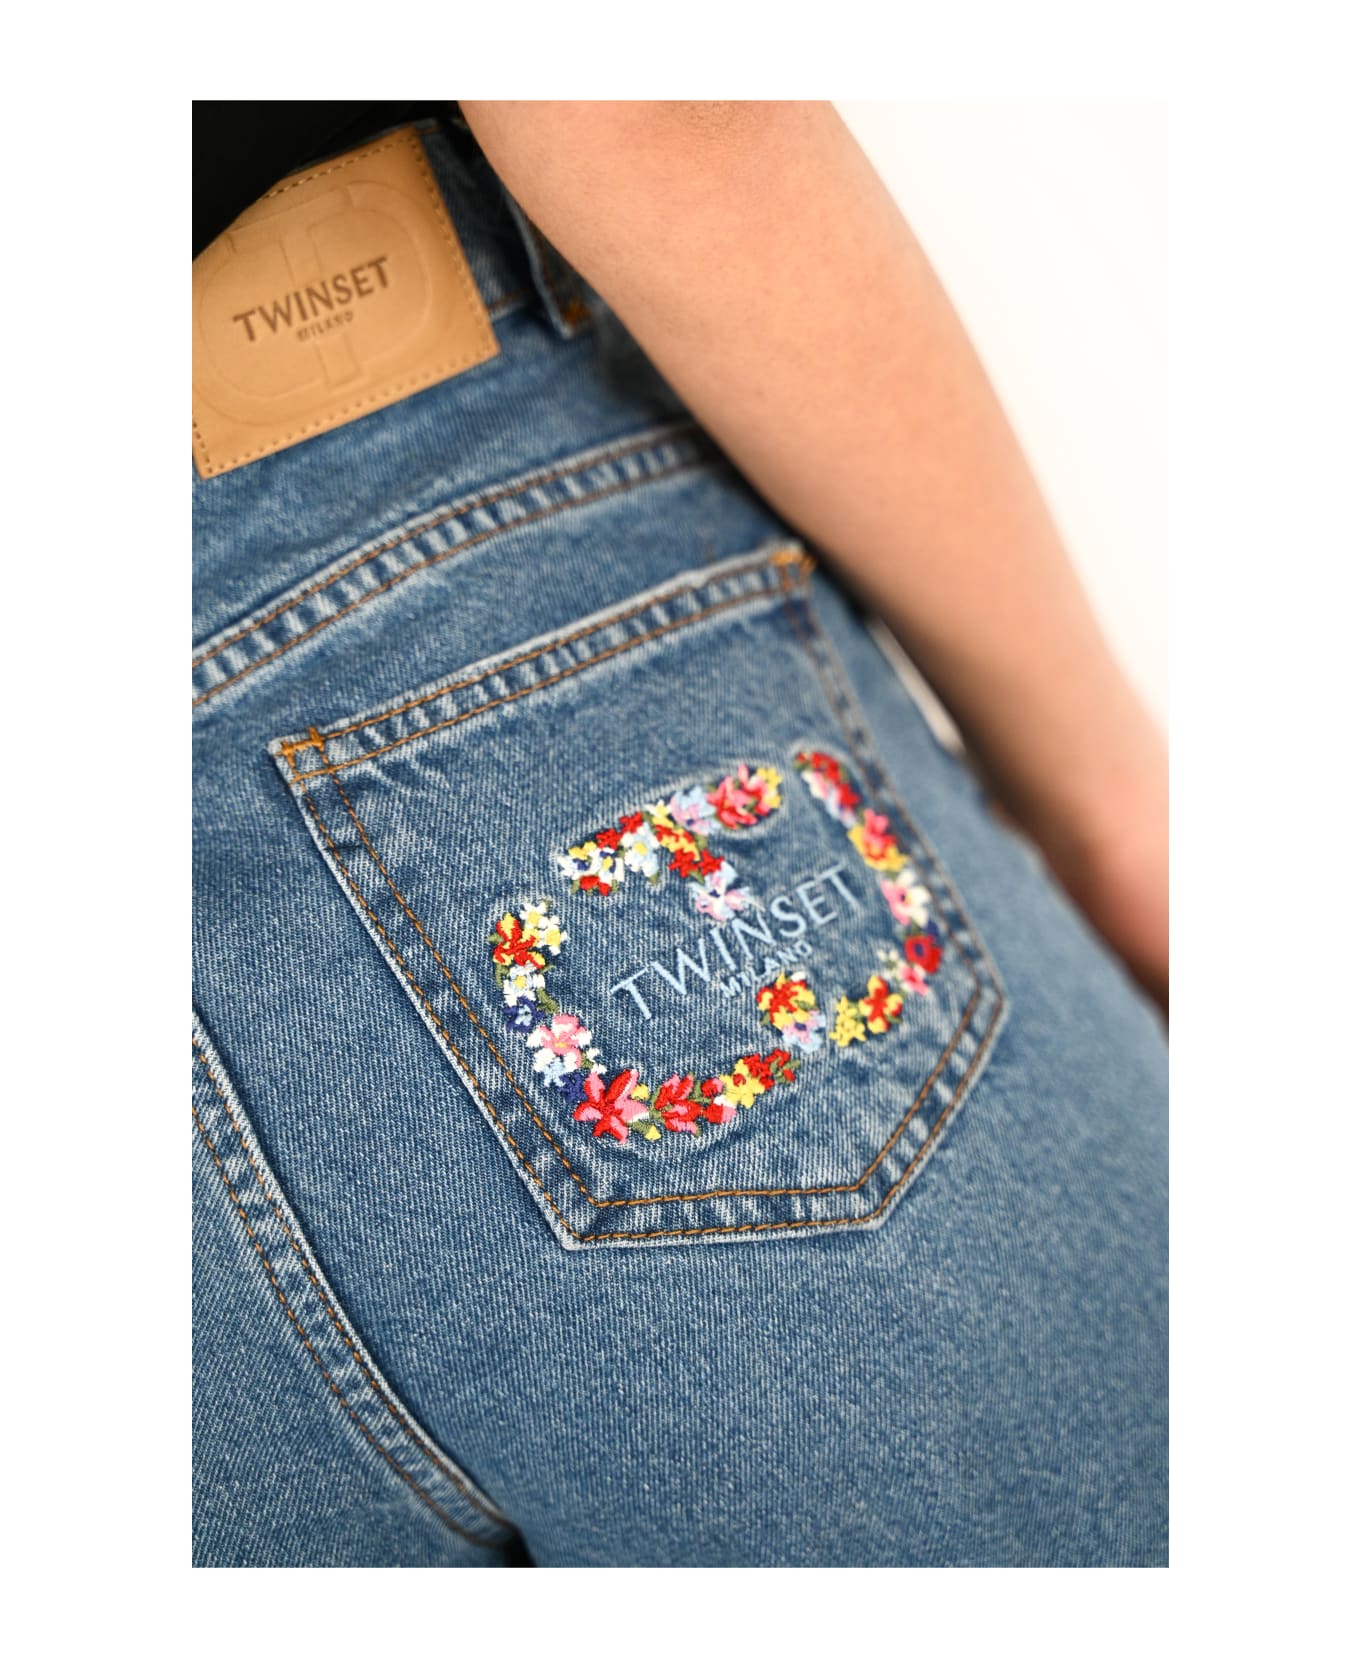 TwinSet Slim Fit Jeans With Floral Oval T - Denim ボトムス